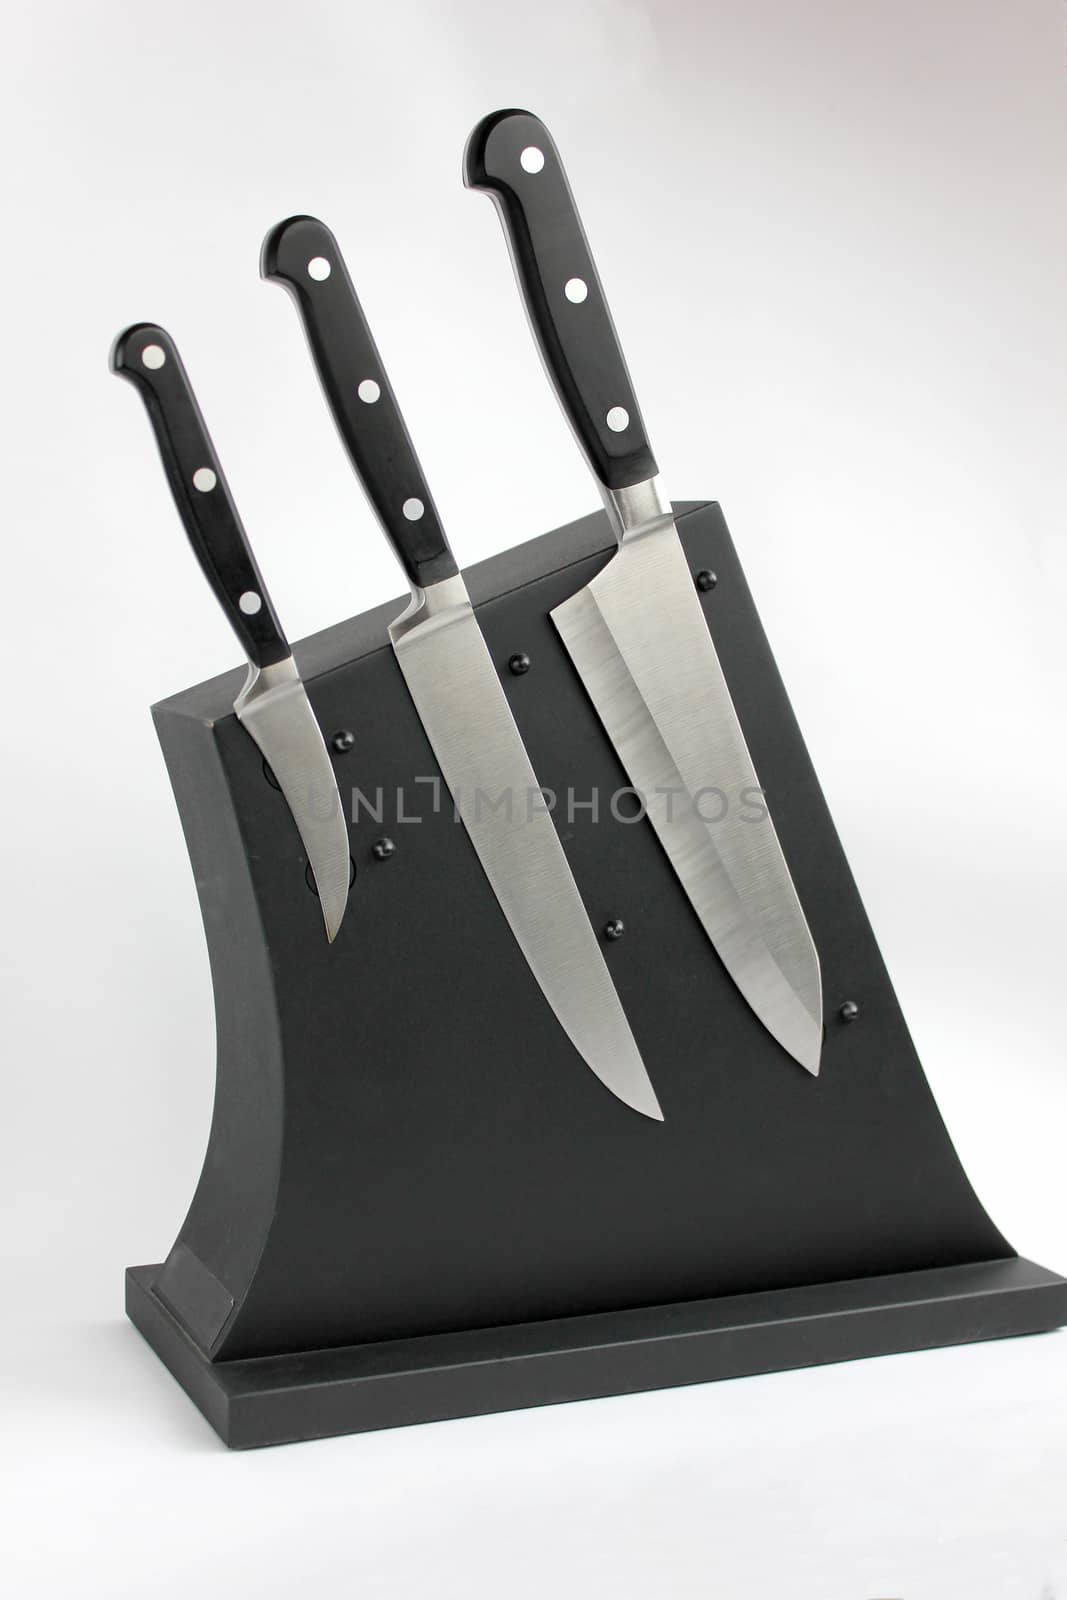 "The cook three" kitchen knifes on a magnetic support